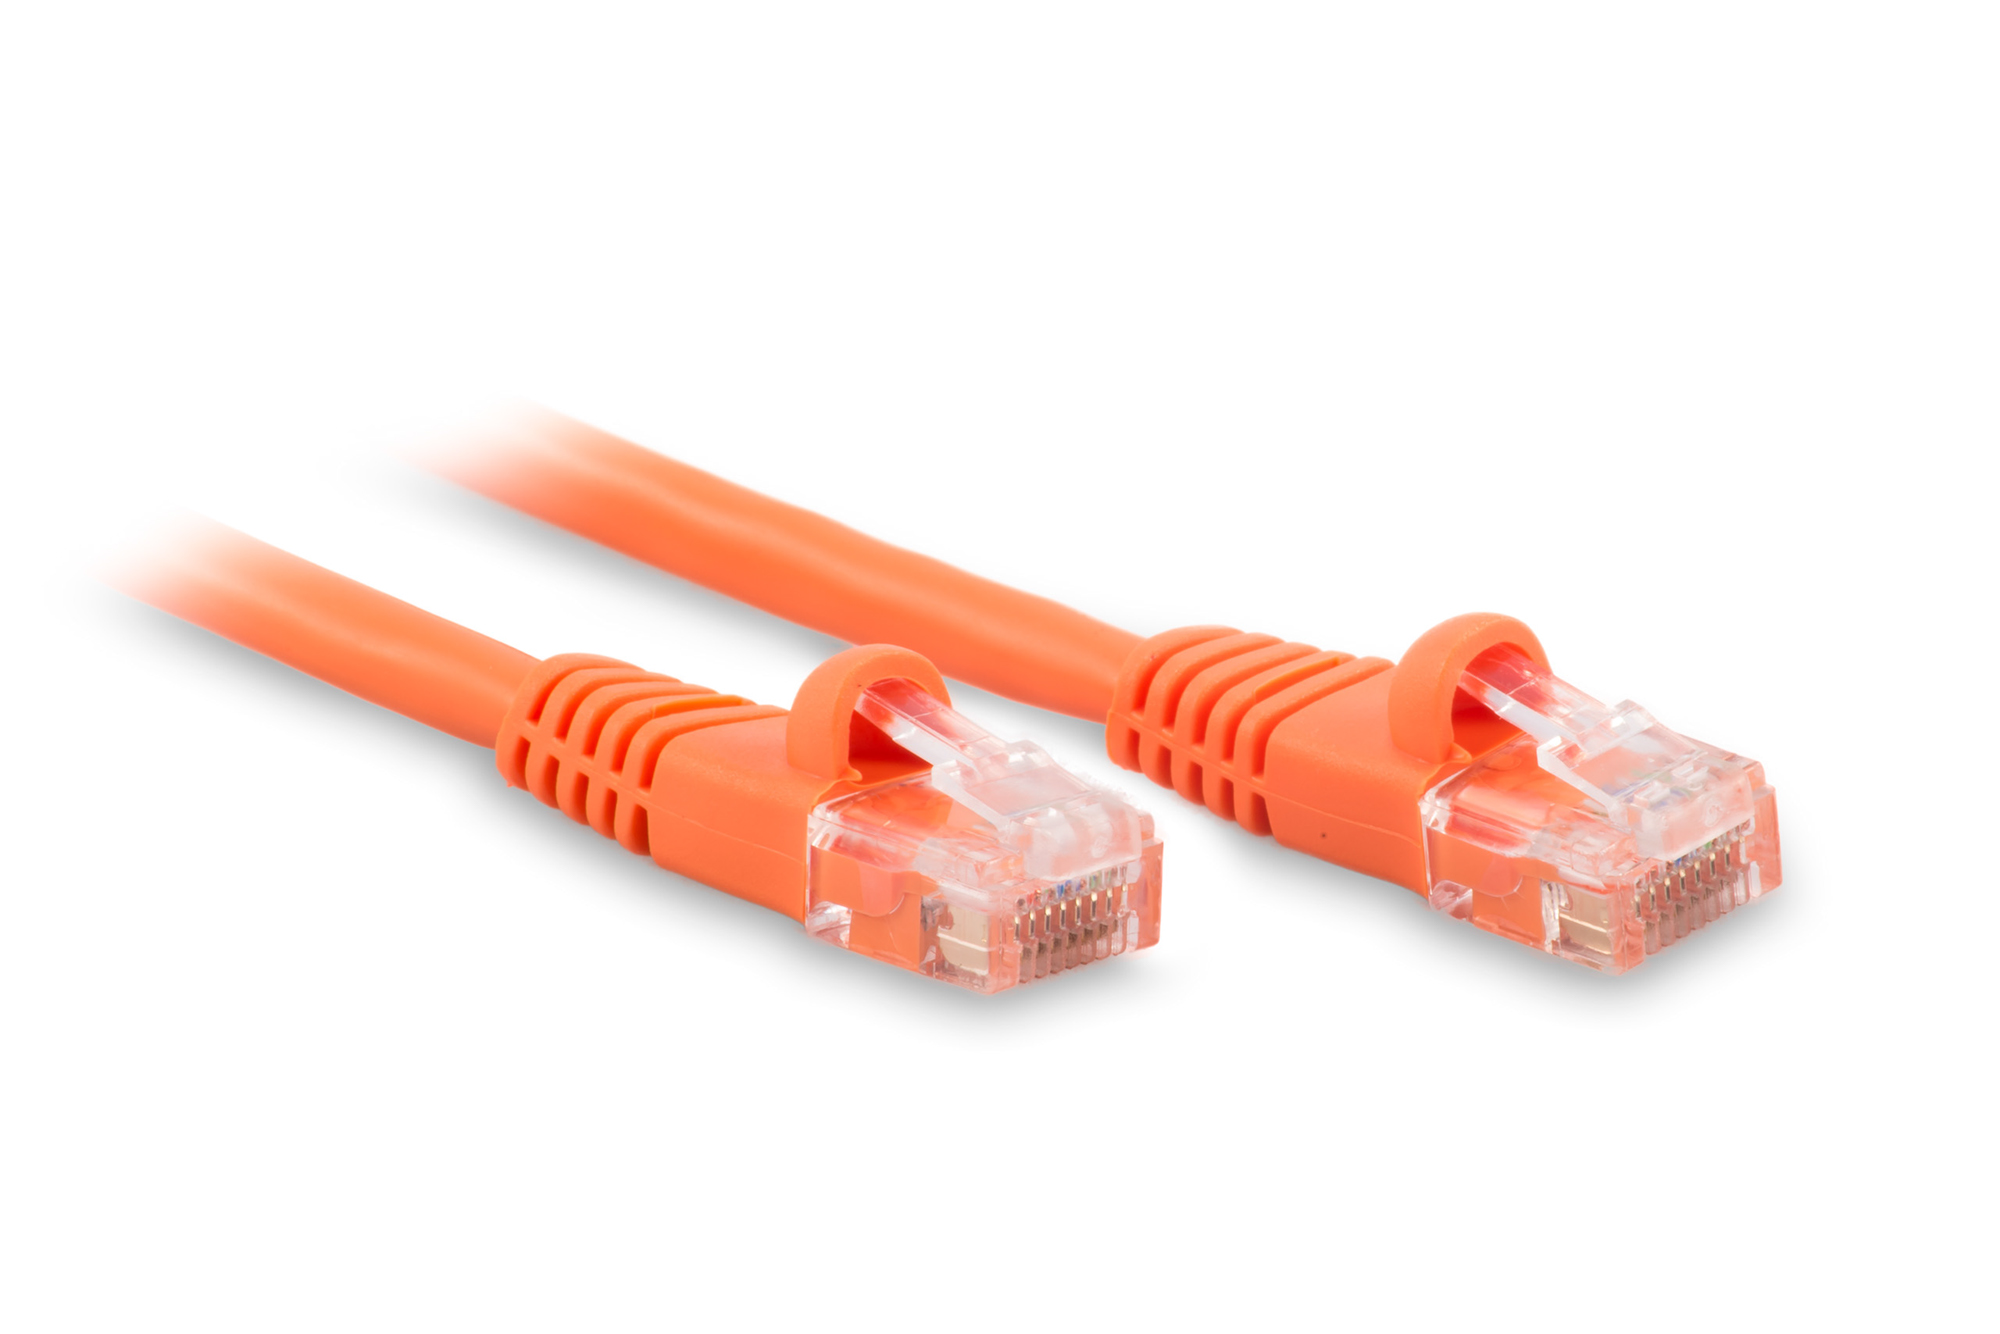 25ft Cat6 Ethernet Patch Cable - Orange Color - Snagless Boot